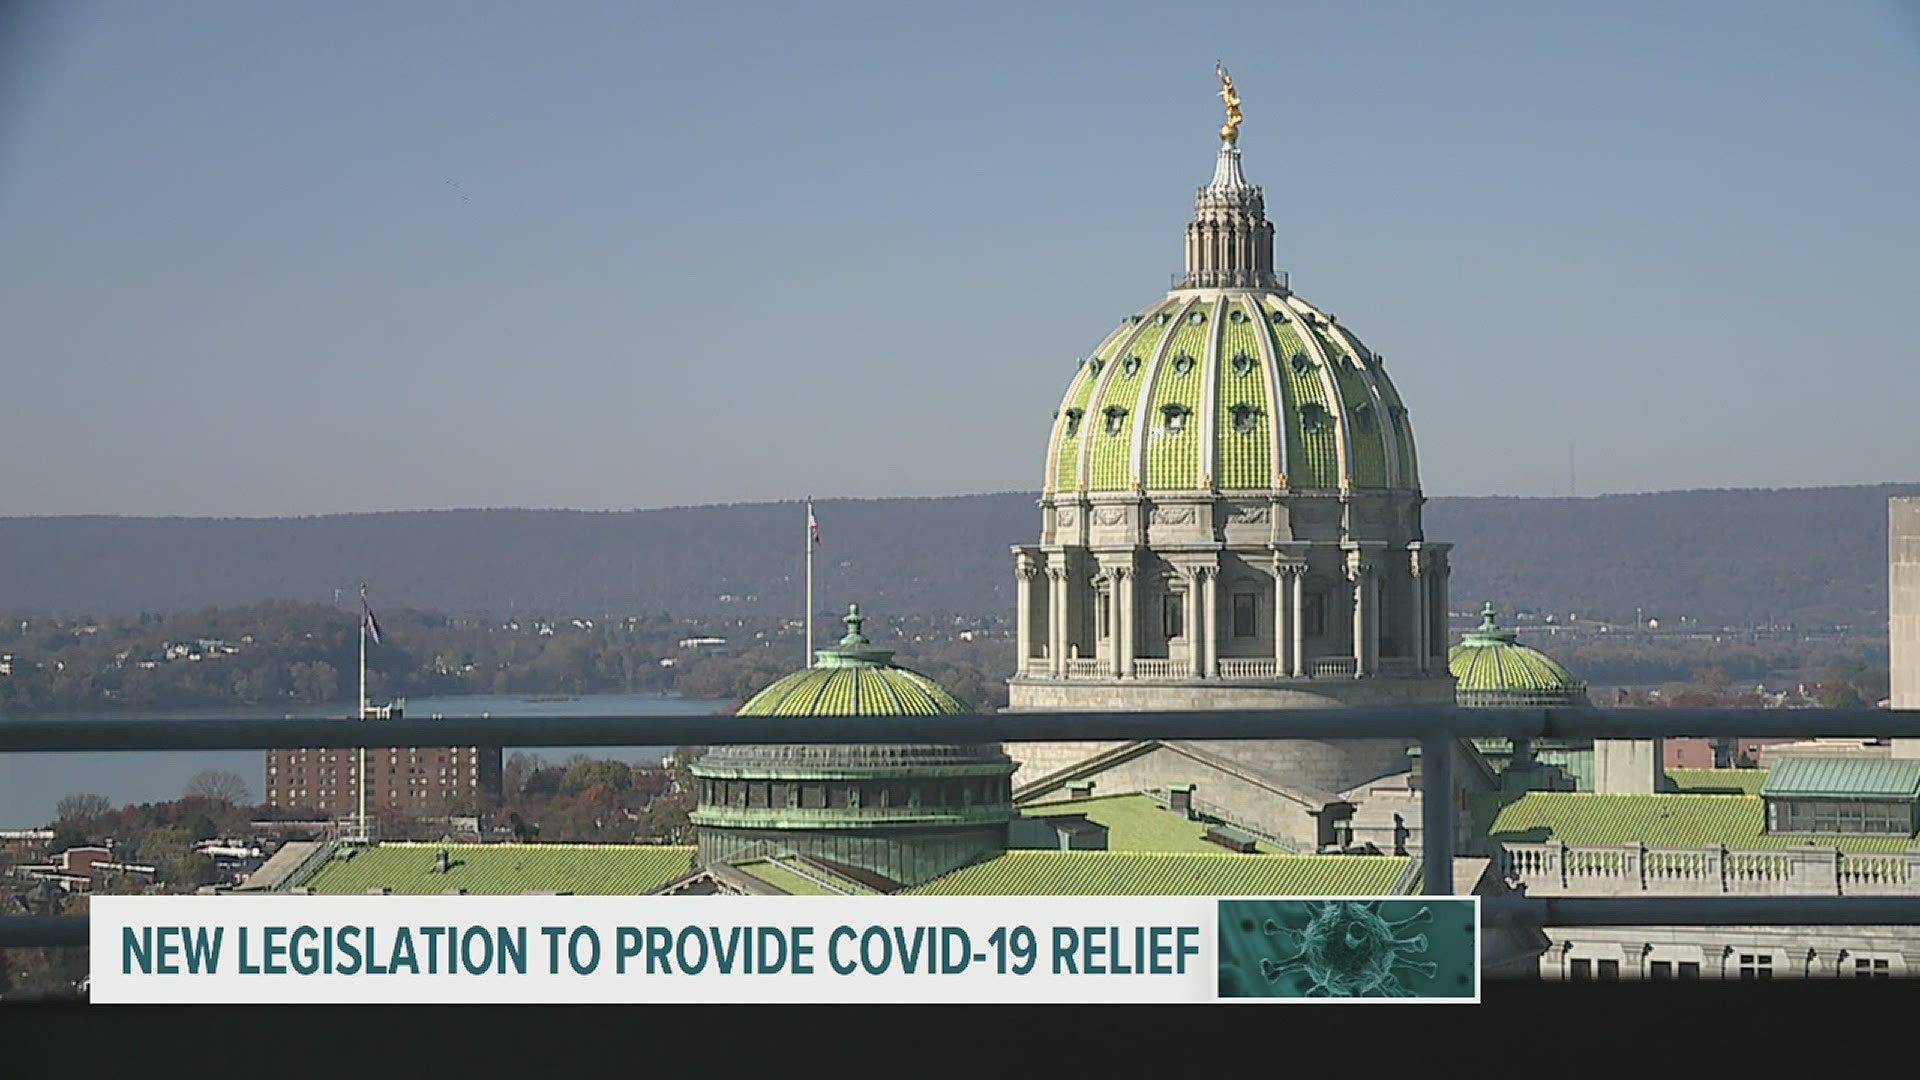 Governor Tom Wolf has signed Senate Bill 109 which includes over $900 million to provide relief for Pennsylvania residents and business owners.